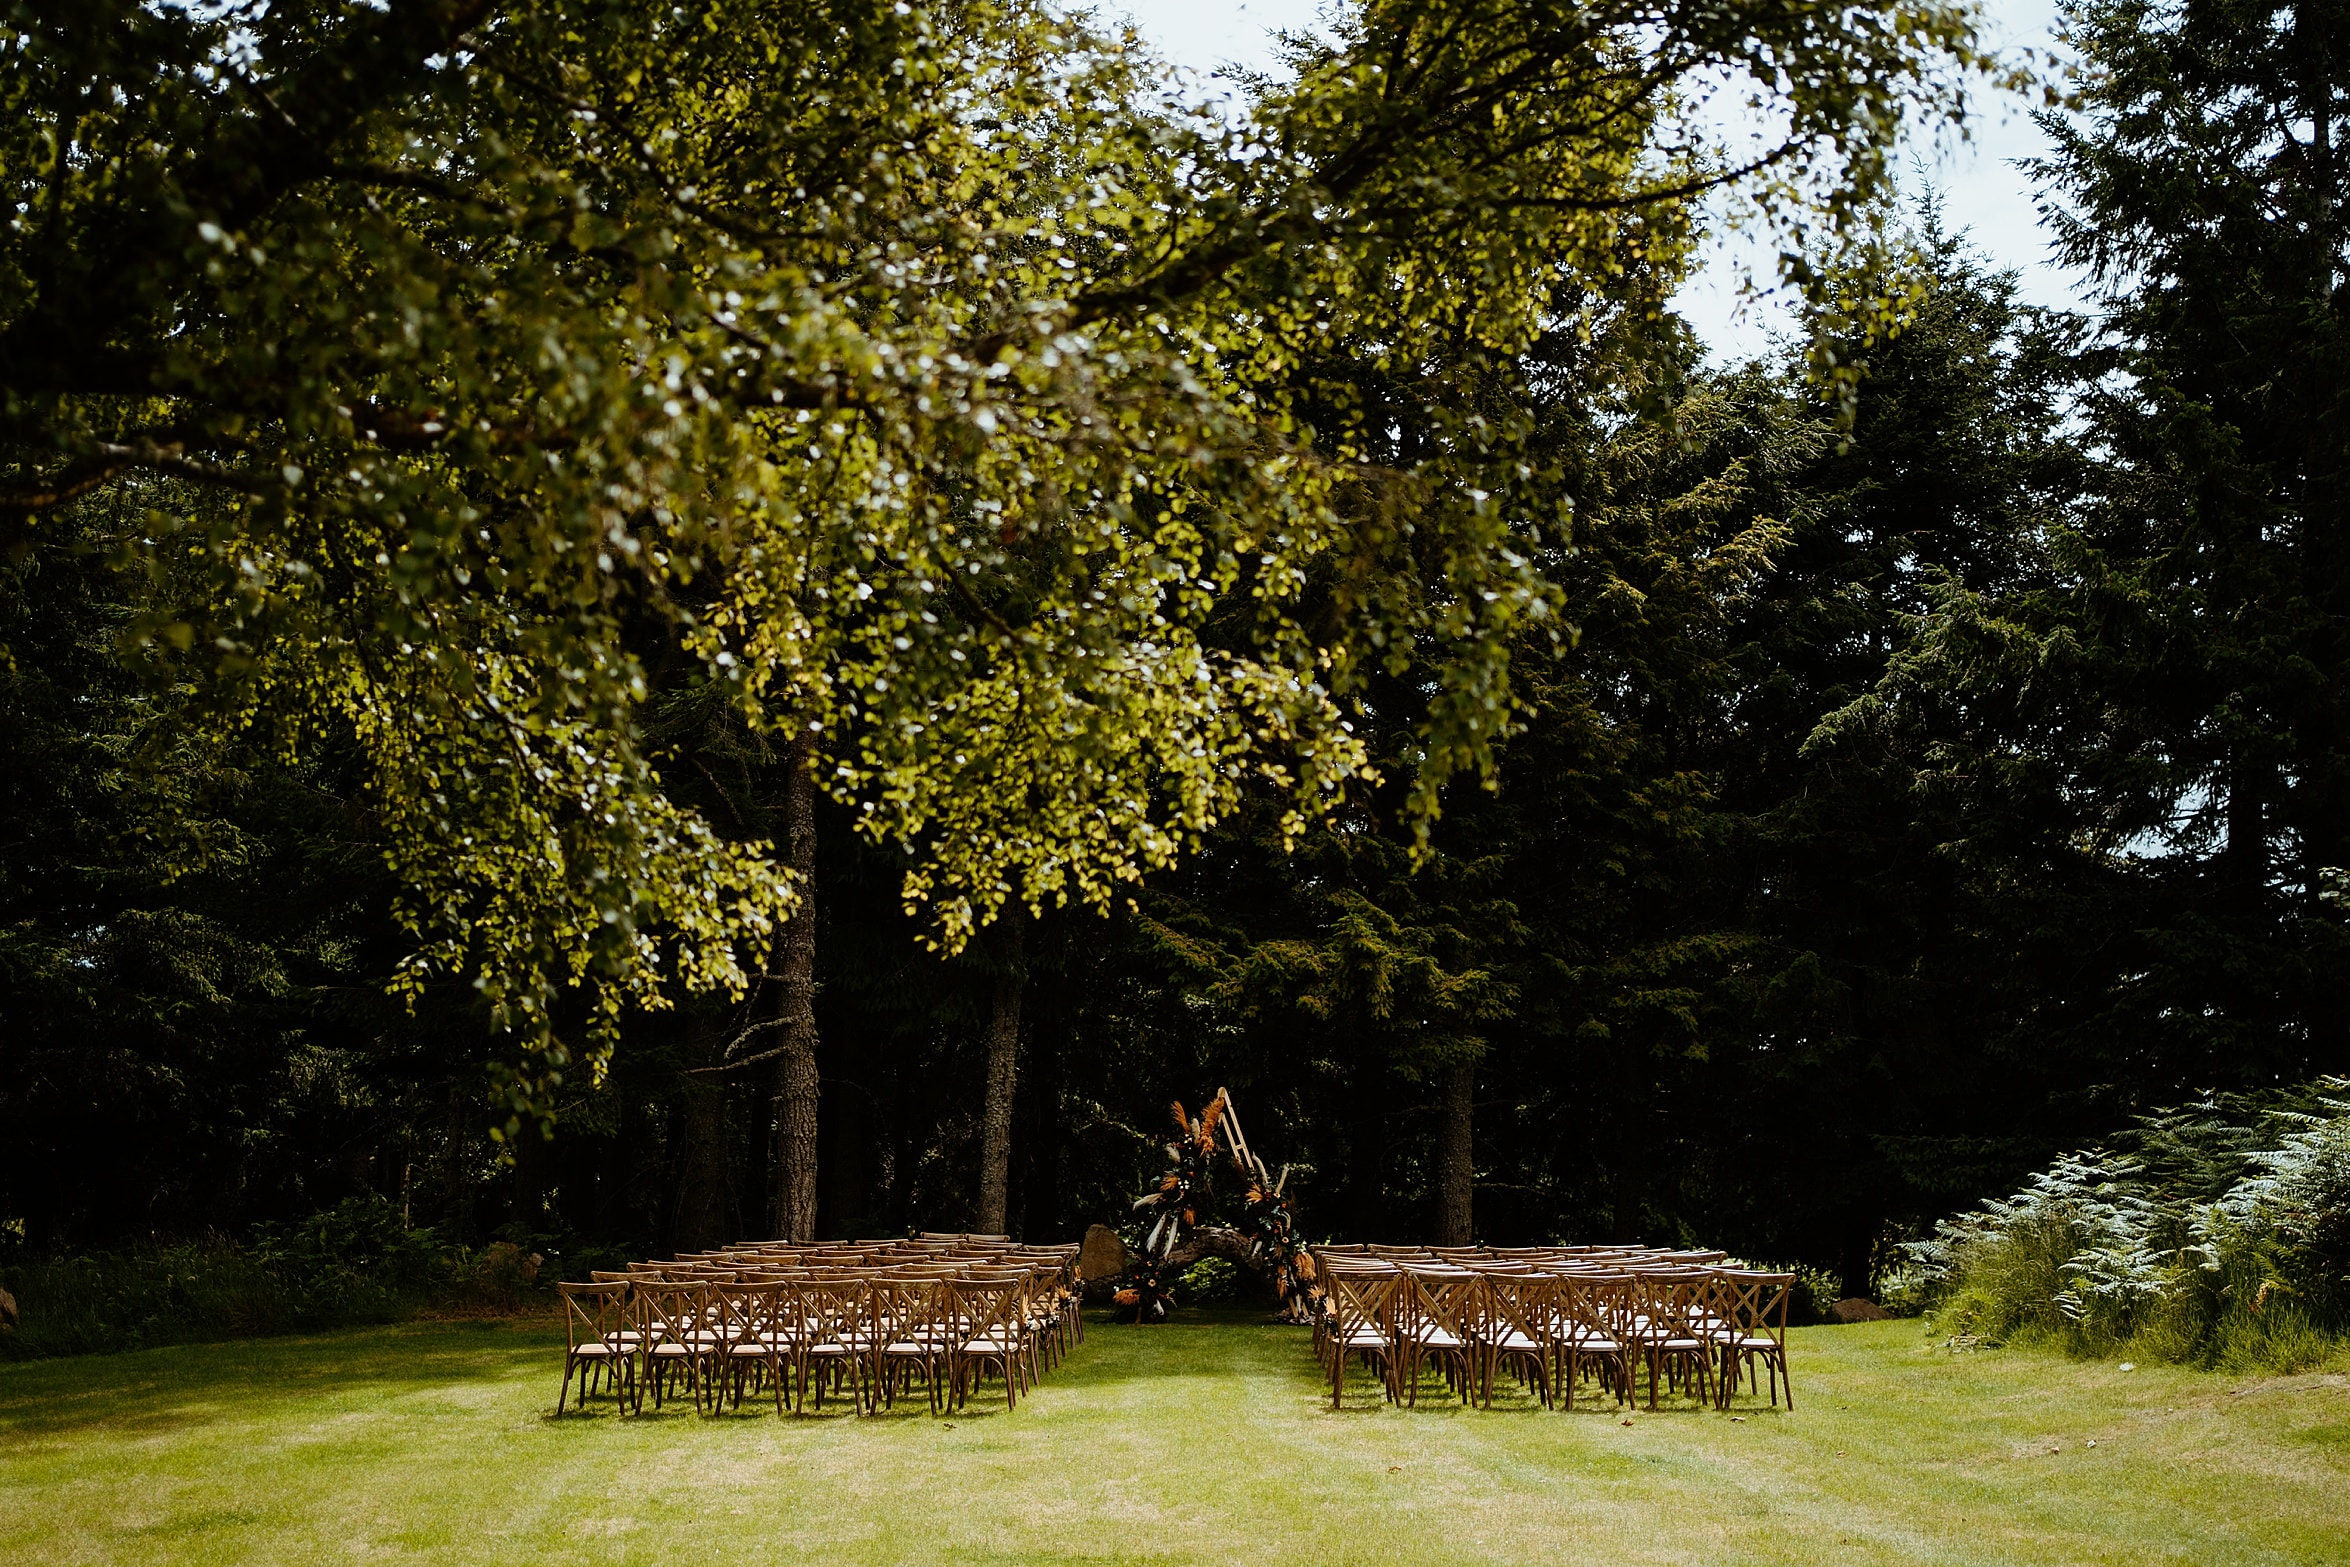 view of outdoor ceremony location before guests arrive rows of wooden seats on grass lawn in front of woodland cardney steading exclusive use wedding venue